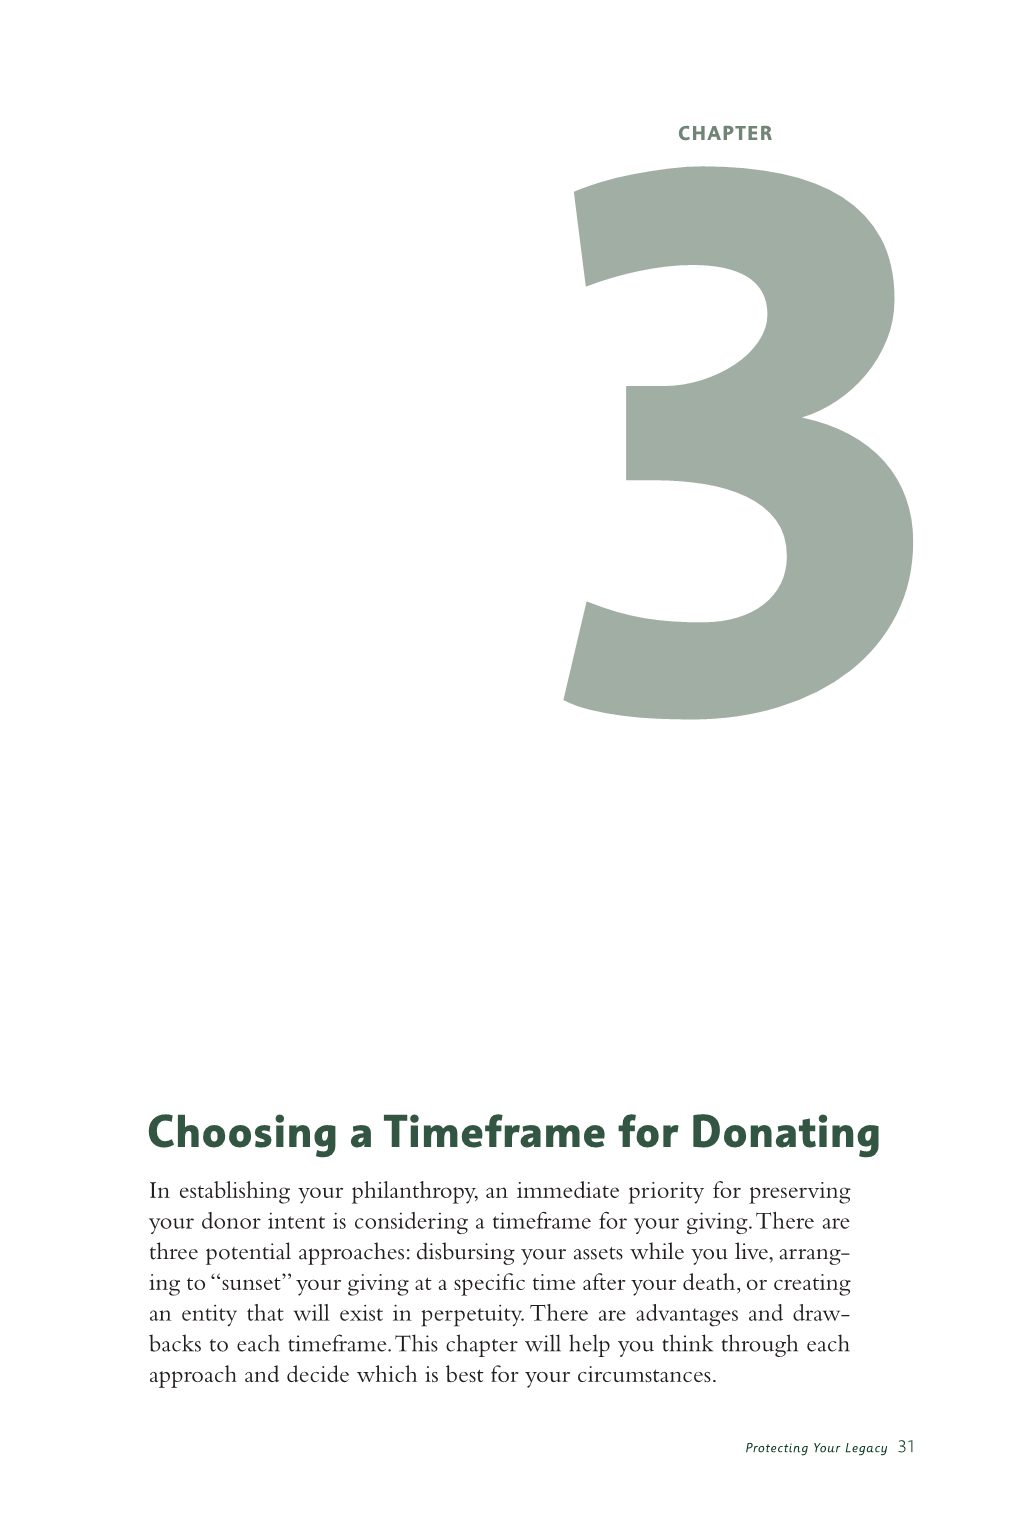 Choosing a Timeframe for Donating in Establishing Your Philanthropy, an Immediate Priority for Preserving Your Donor Intent Is Considering a Timeframe for Your Giving